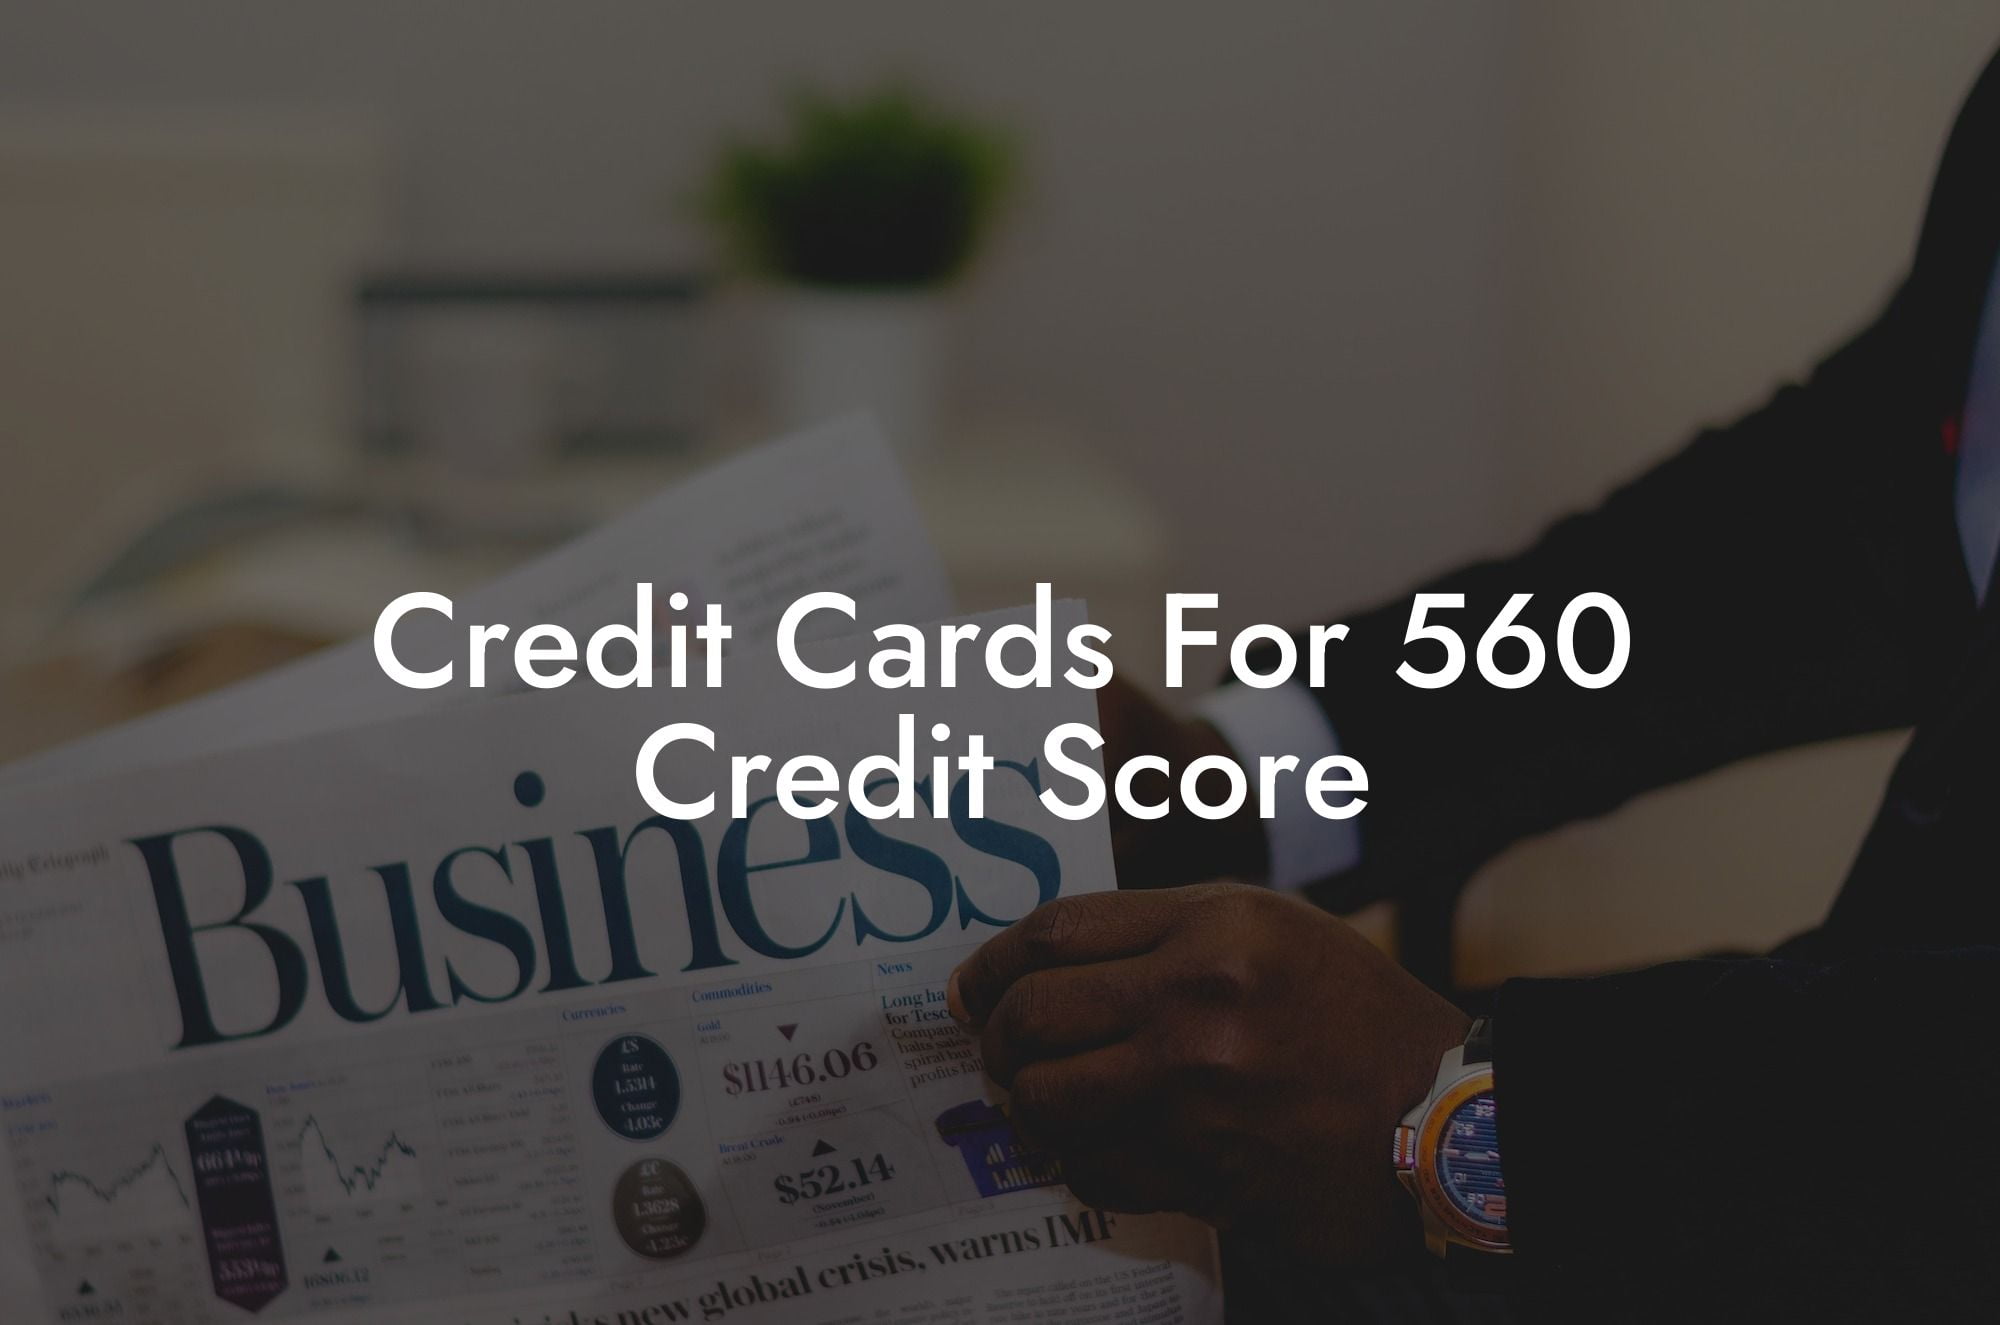 Credit Cards For 560 Credit Score